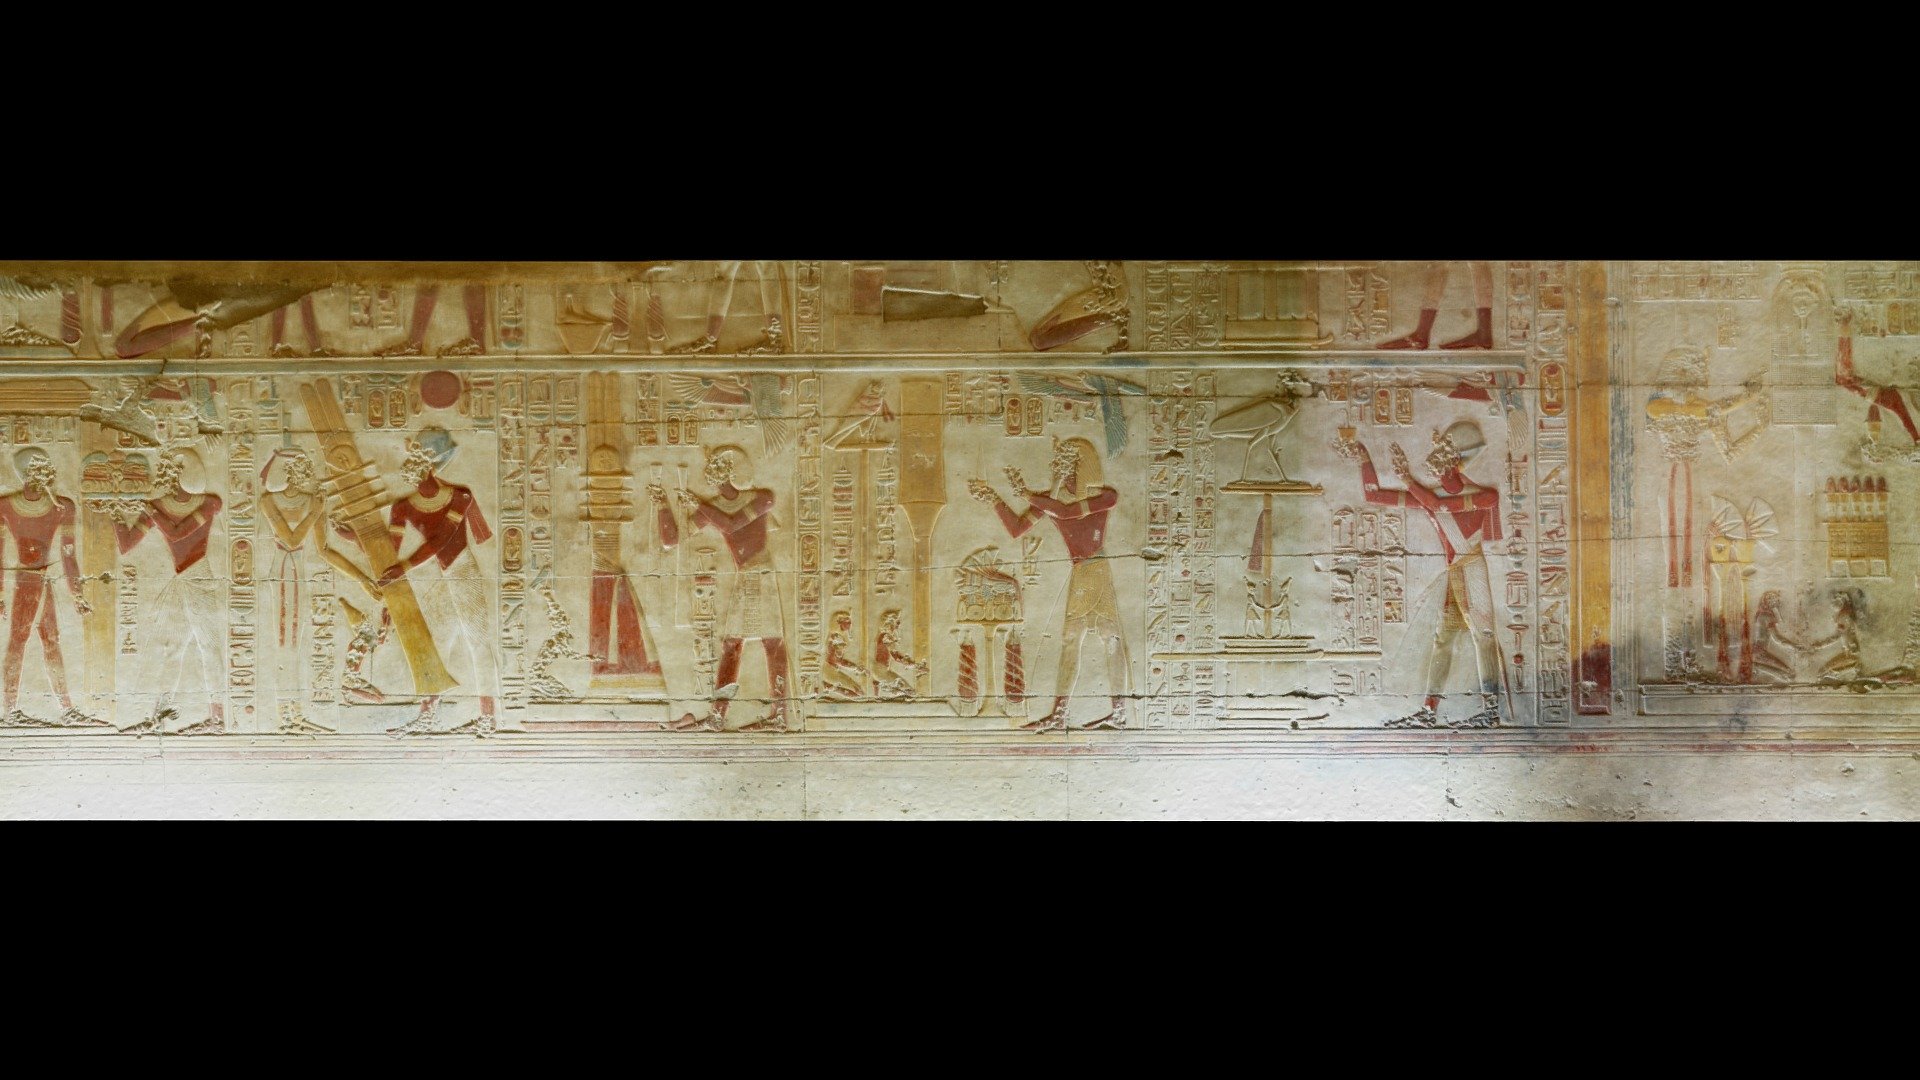 Ritual Scenes in the Temple of Seti I, Abydos